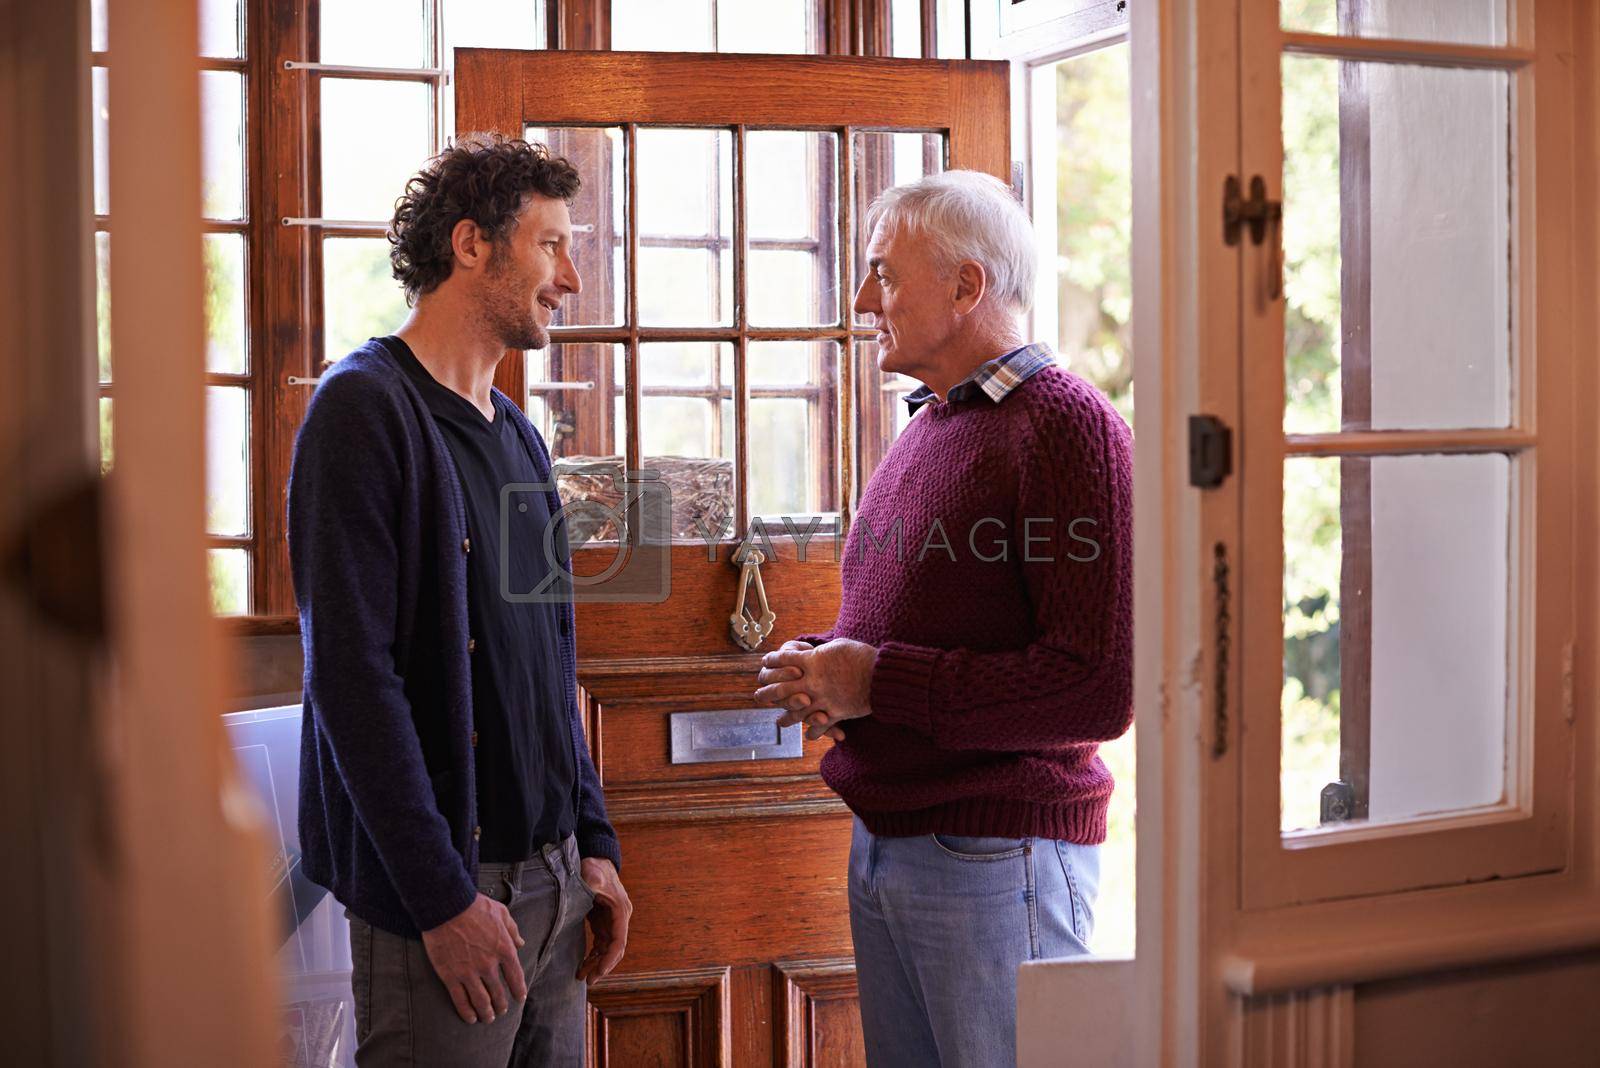 Some fatherly advise. A shot of a father and his adult son having a conversation at home